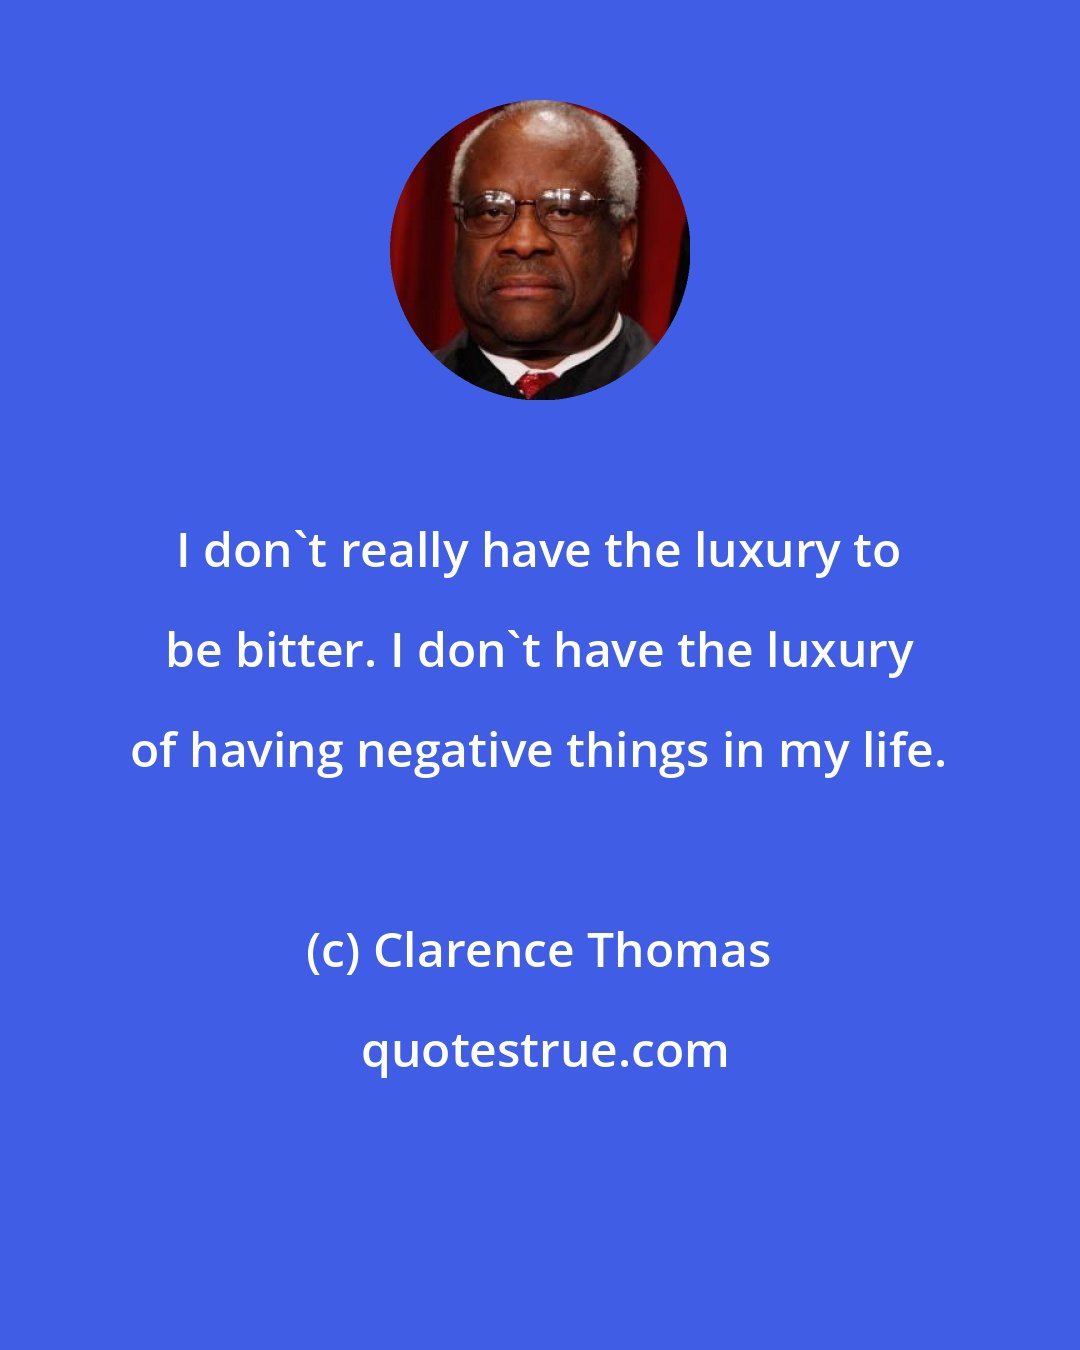 Clarence Thomas: I don't really have the luxury to be bitter. I don't have the luxury of having negative things in my life.